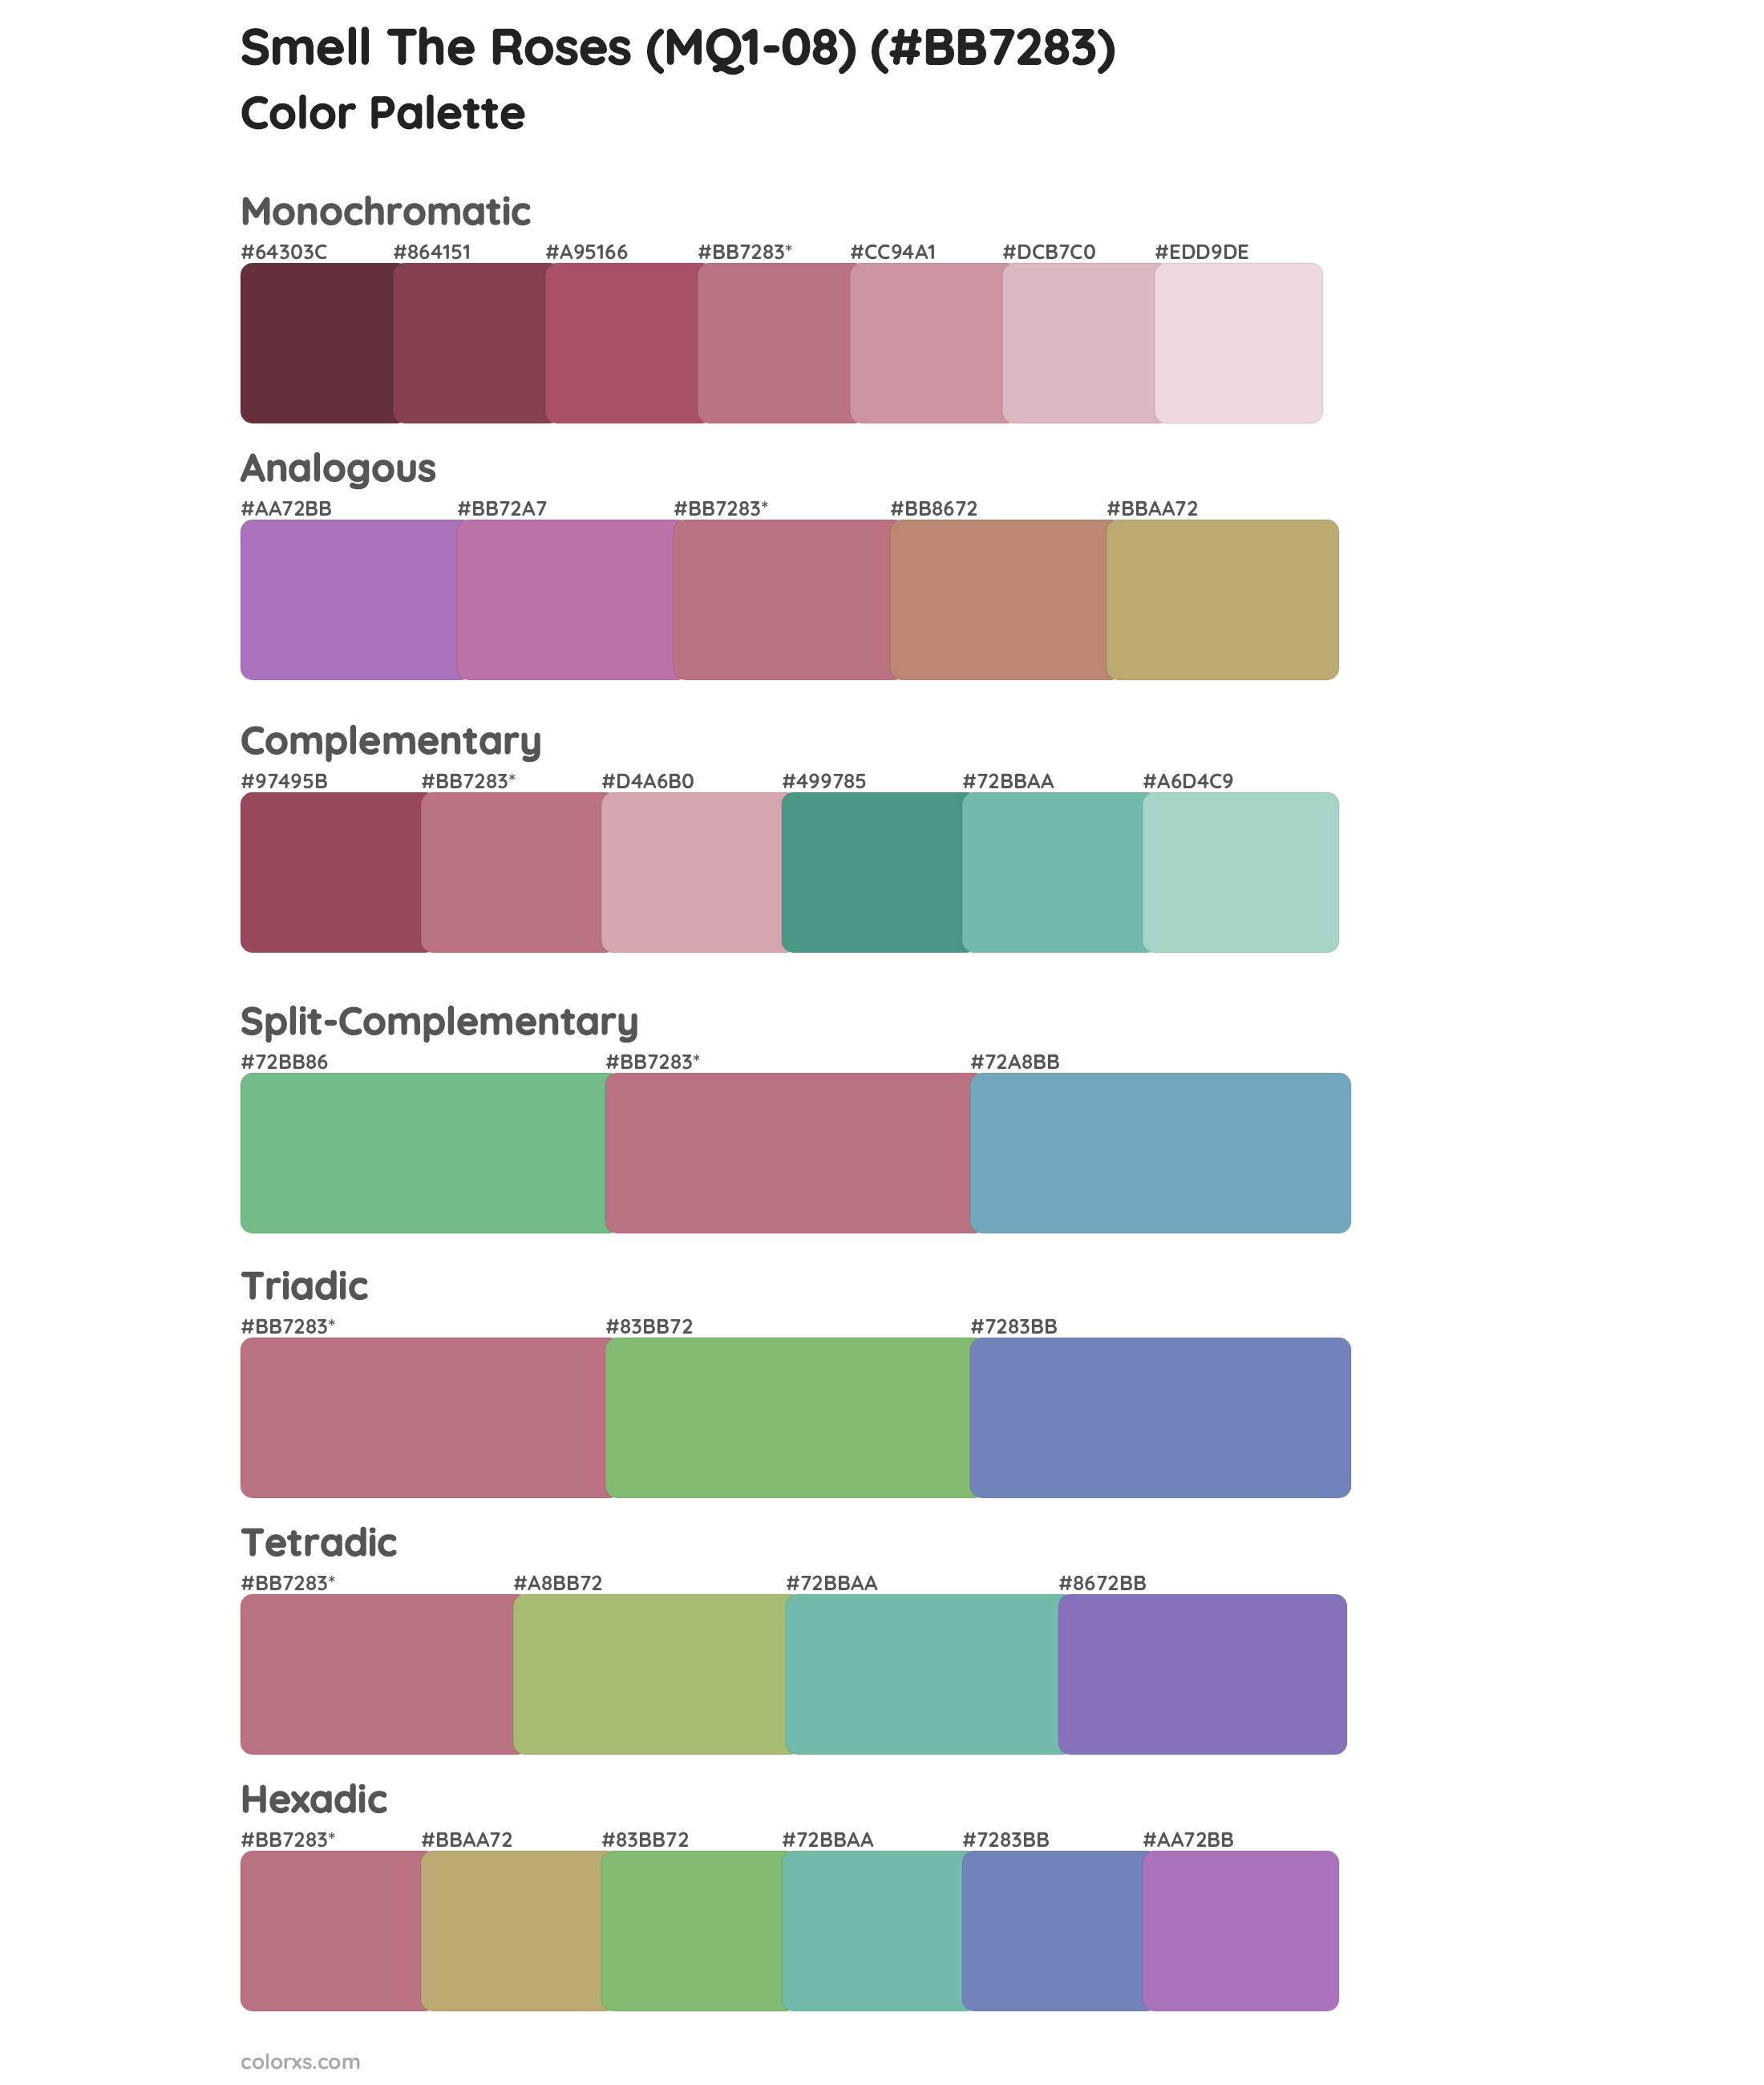 Smell The Roses (MQ1-08) Color Scheme Palettes